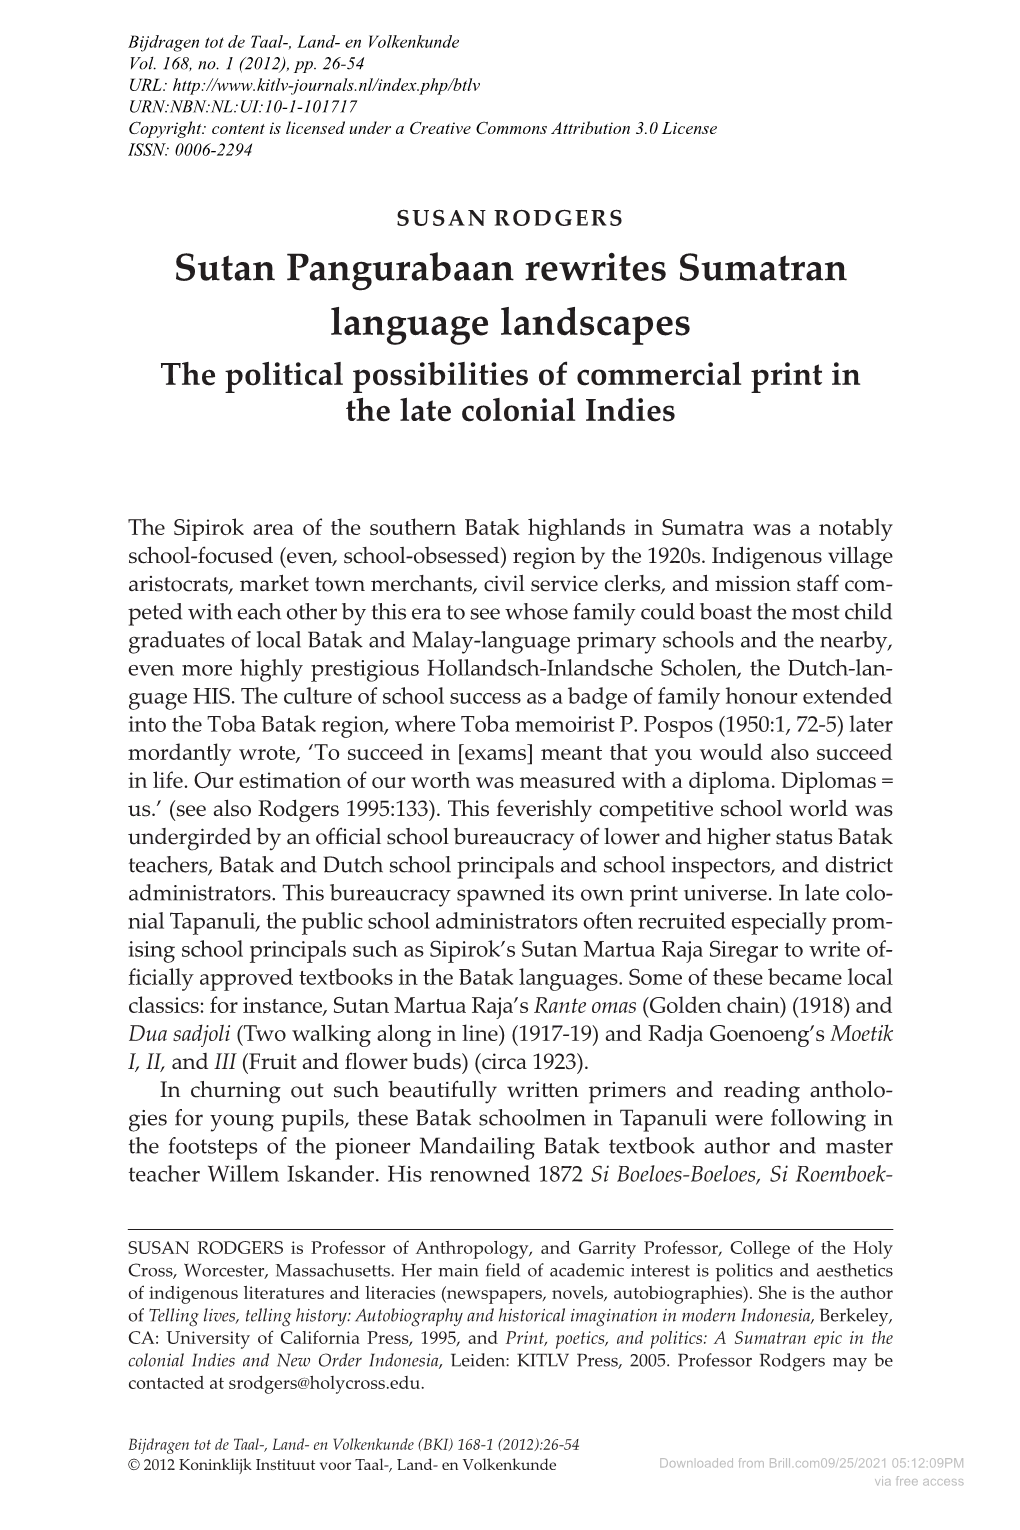 Sutan Pangurabaan Rewrites Sumatran Language Landscapes the Political Possibilities of Commercial Print in the Late Colonial Indies